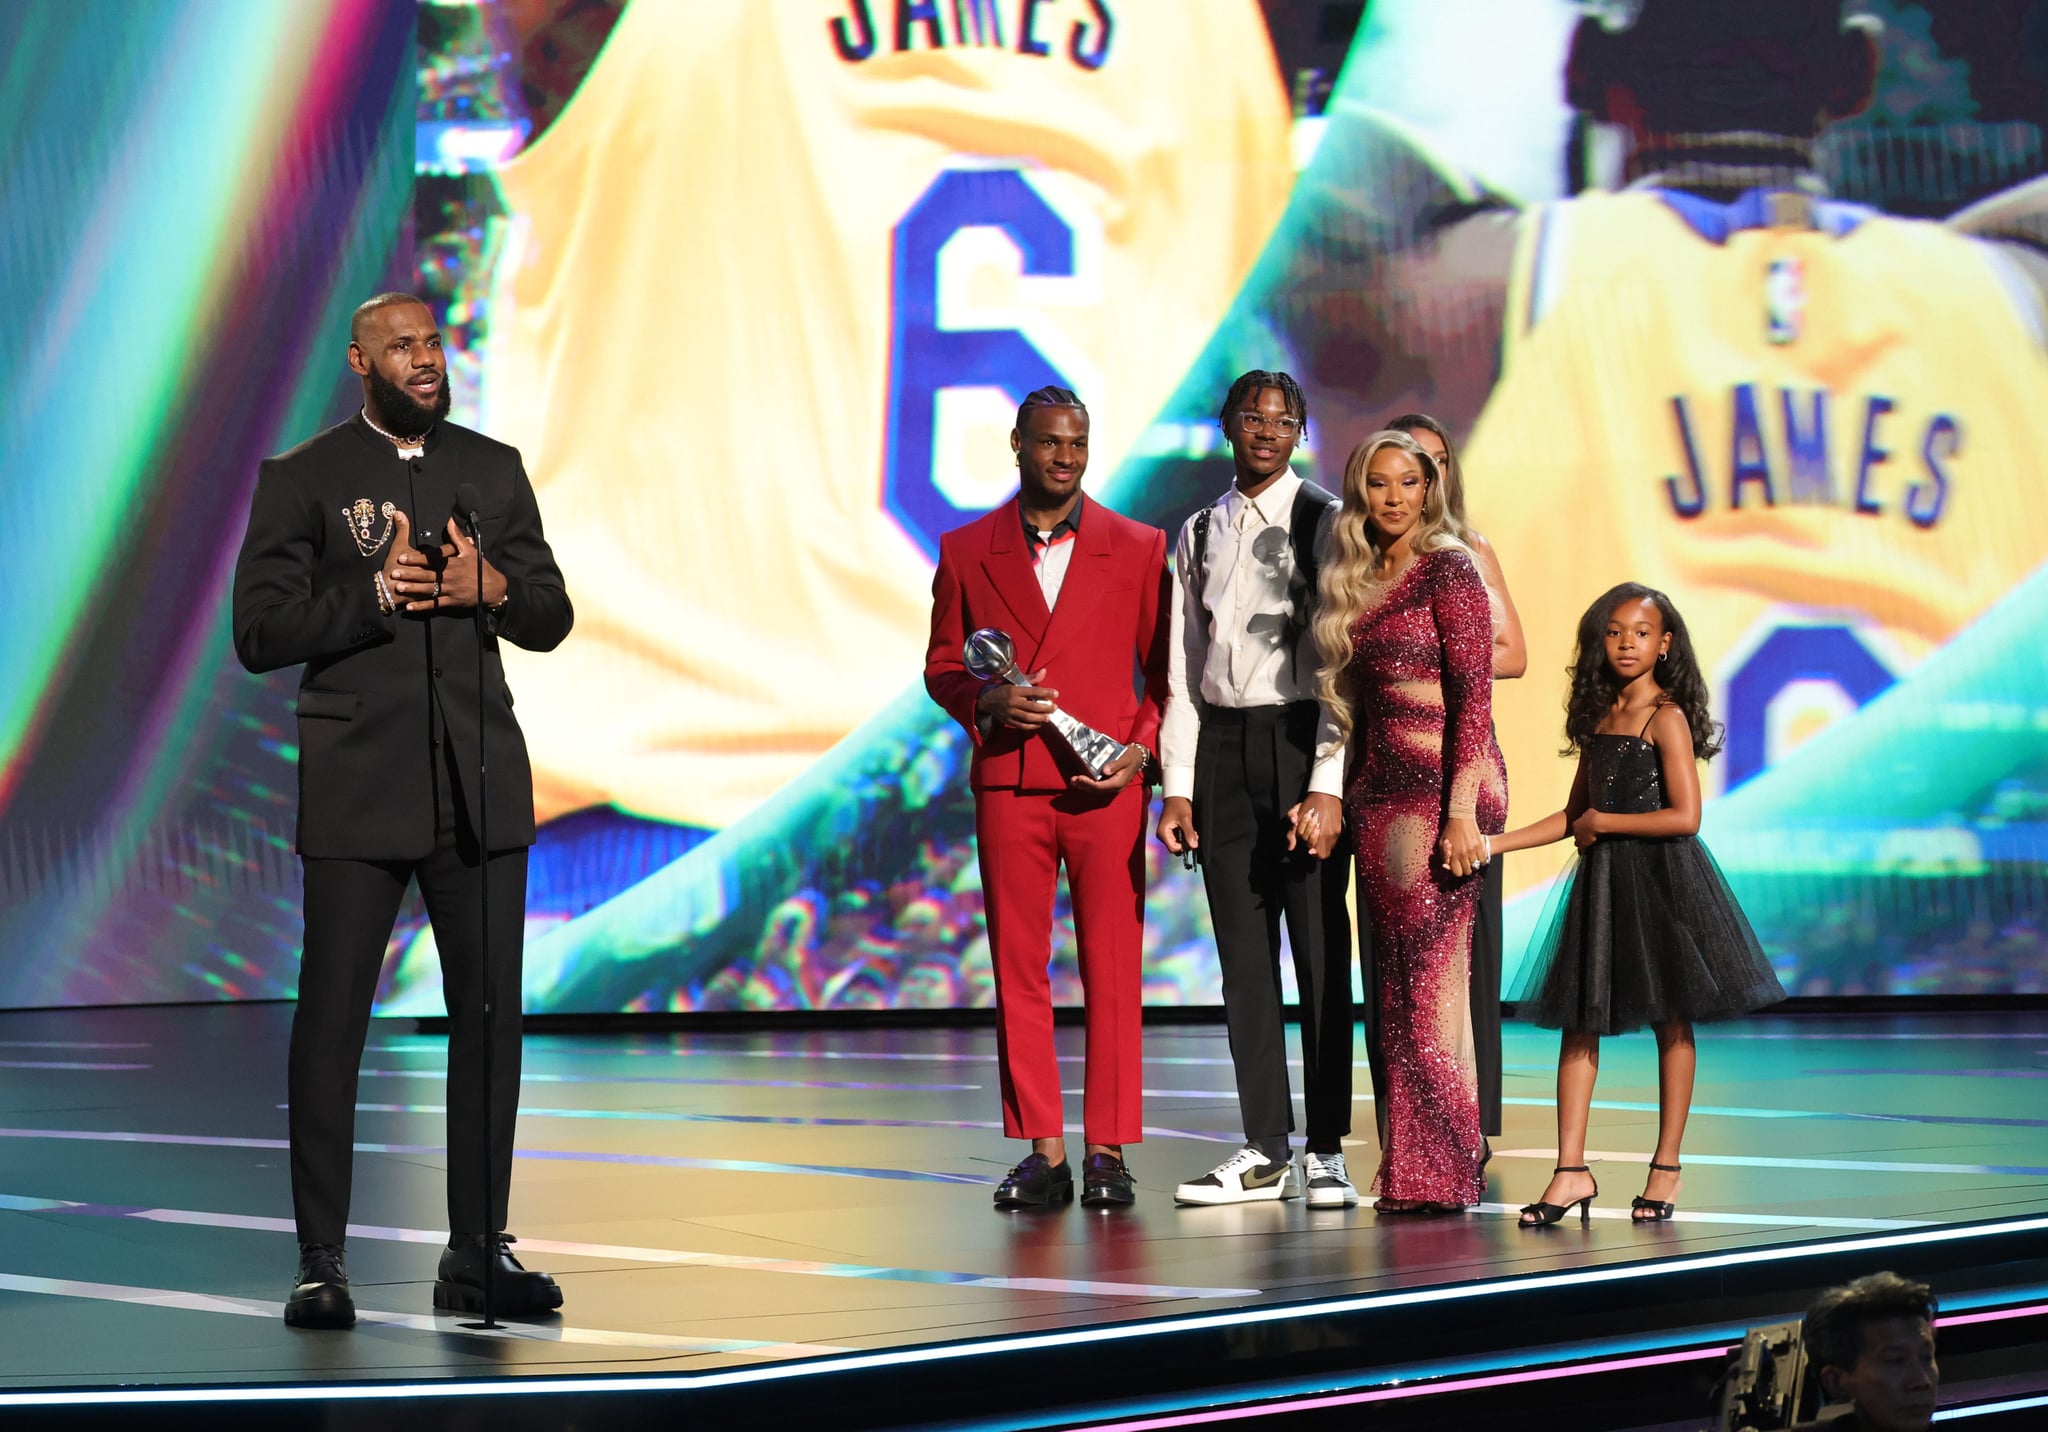 HOLLYWOOD, CALIFORNIA - JULY 12: (L-R) LeBron James, winner of Best Record-Breaking Performance, Bronny James, Bryce James, Savannah James and Zhuri James speak onstage during The 2023 ESPY Awards at Dolby Theatre on July 12, 2023 in Hollywood, California. (Photo by Kevin Mazur/Getty Images)